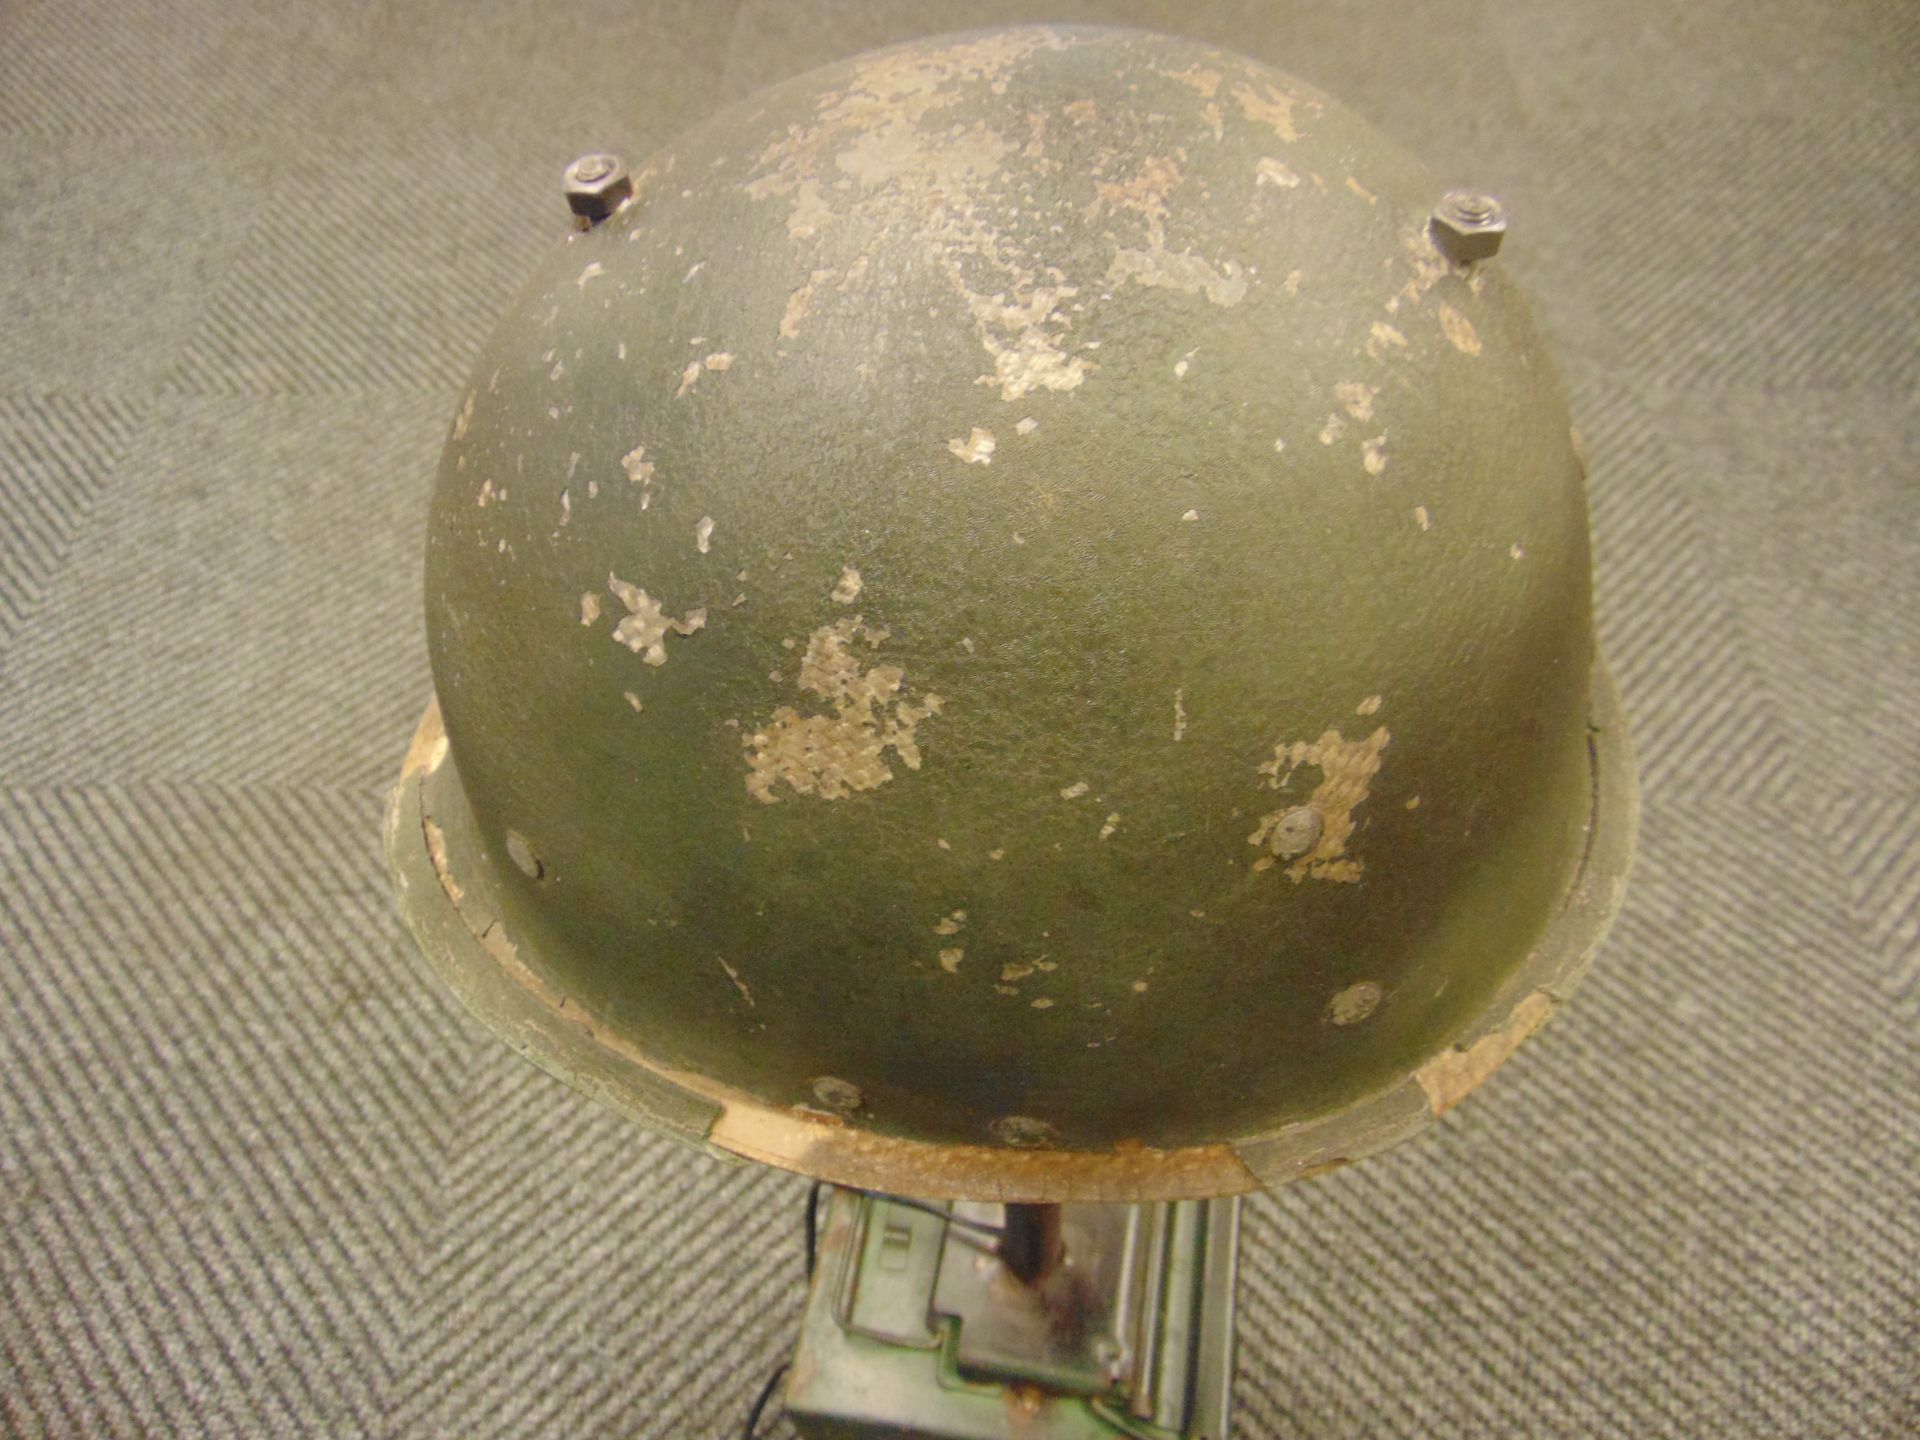 VERY UNUSUAL TABLE LAMP MADE FROM STEEL COMBAT HELMET AMNO BOX ETC - Image 4 of 7